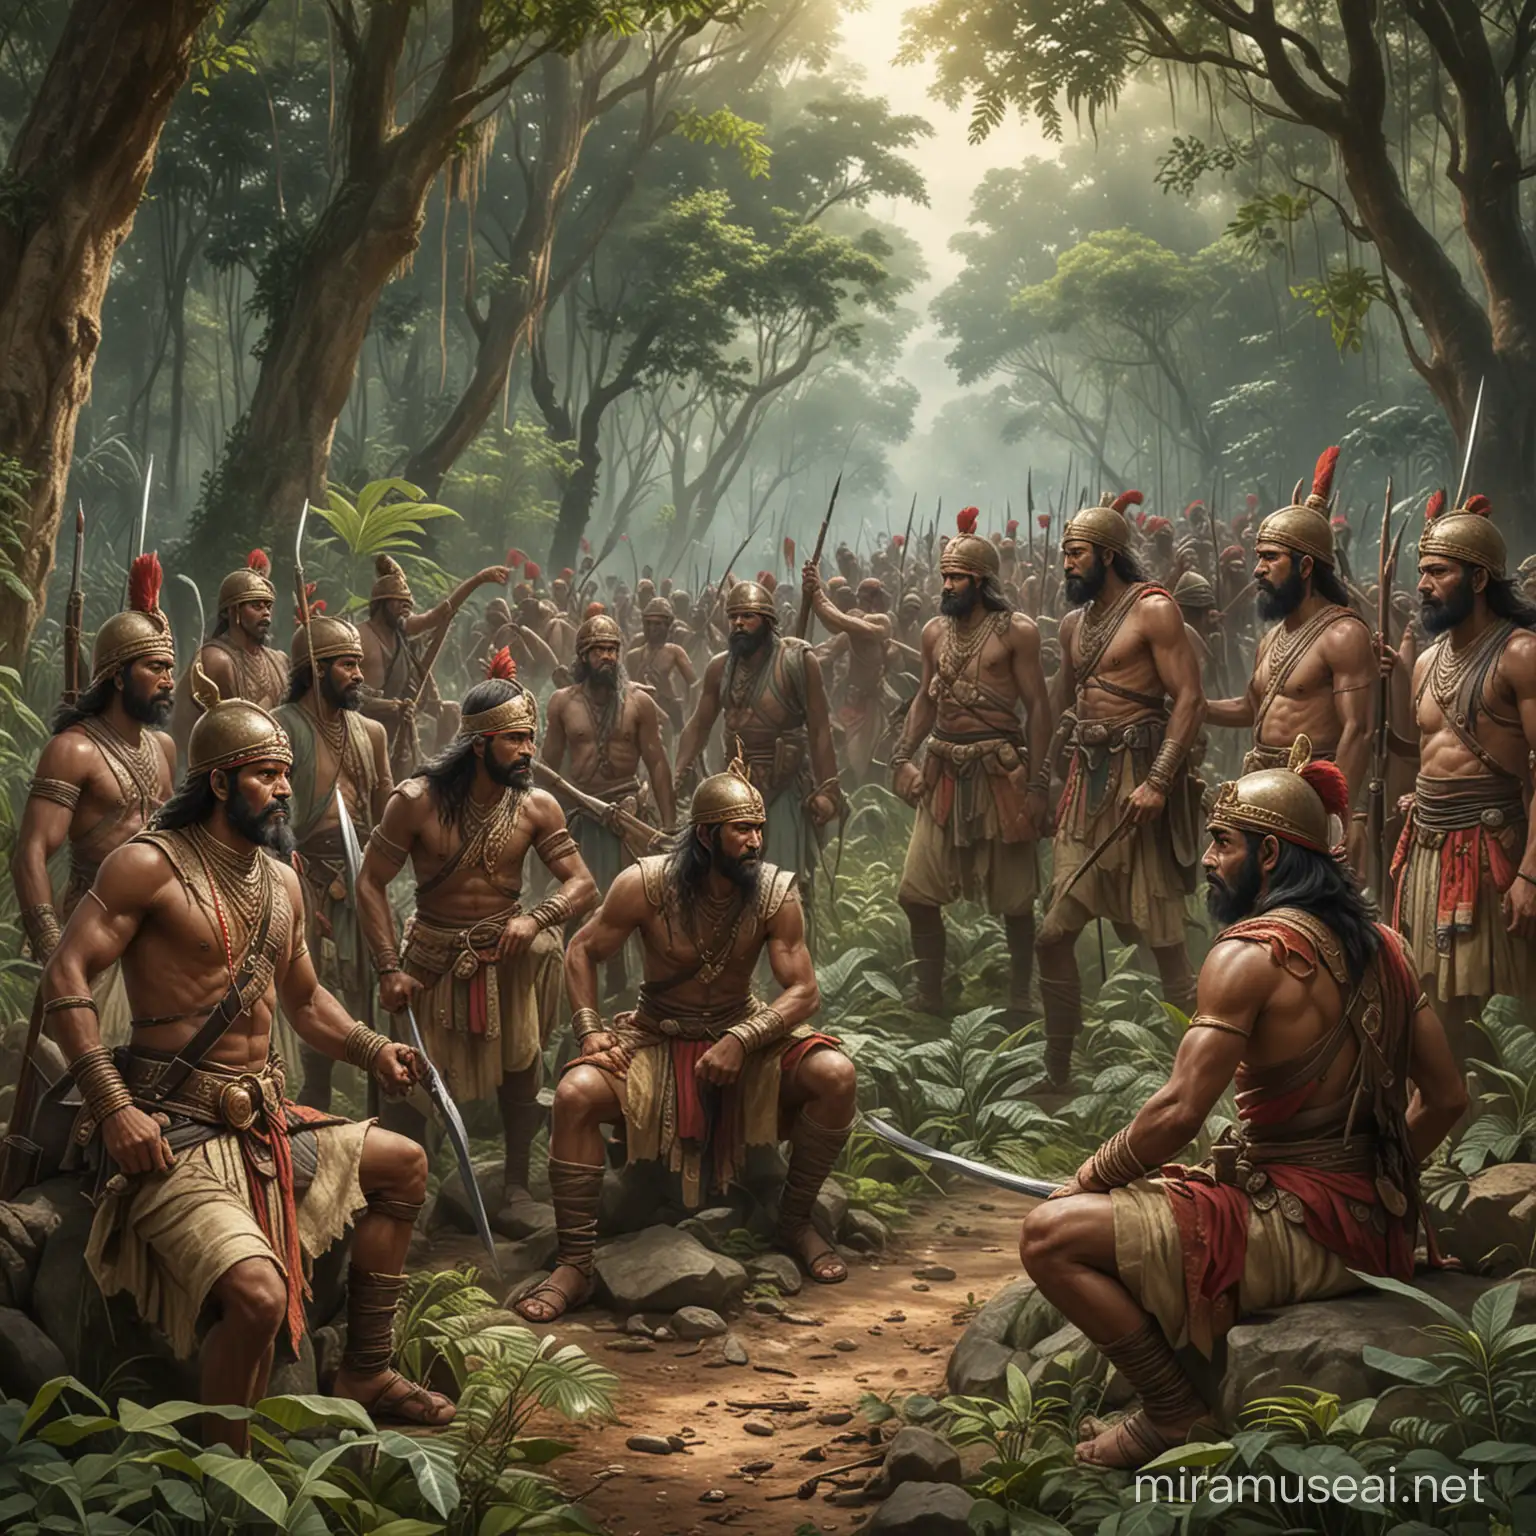 Pangeran Antasari, a fearless leader, strategizing with his Banjar warriors in a lush jungle setting, preparing to defend their homeland against the approaching Dutch forces, capturing the tension and determination of their resistance.